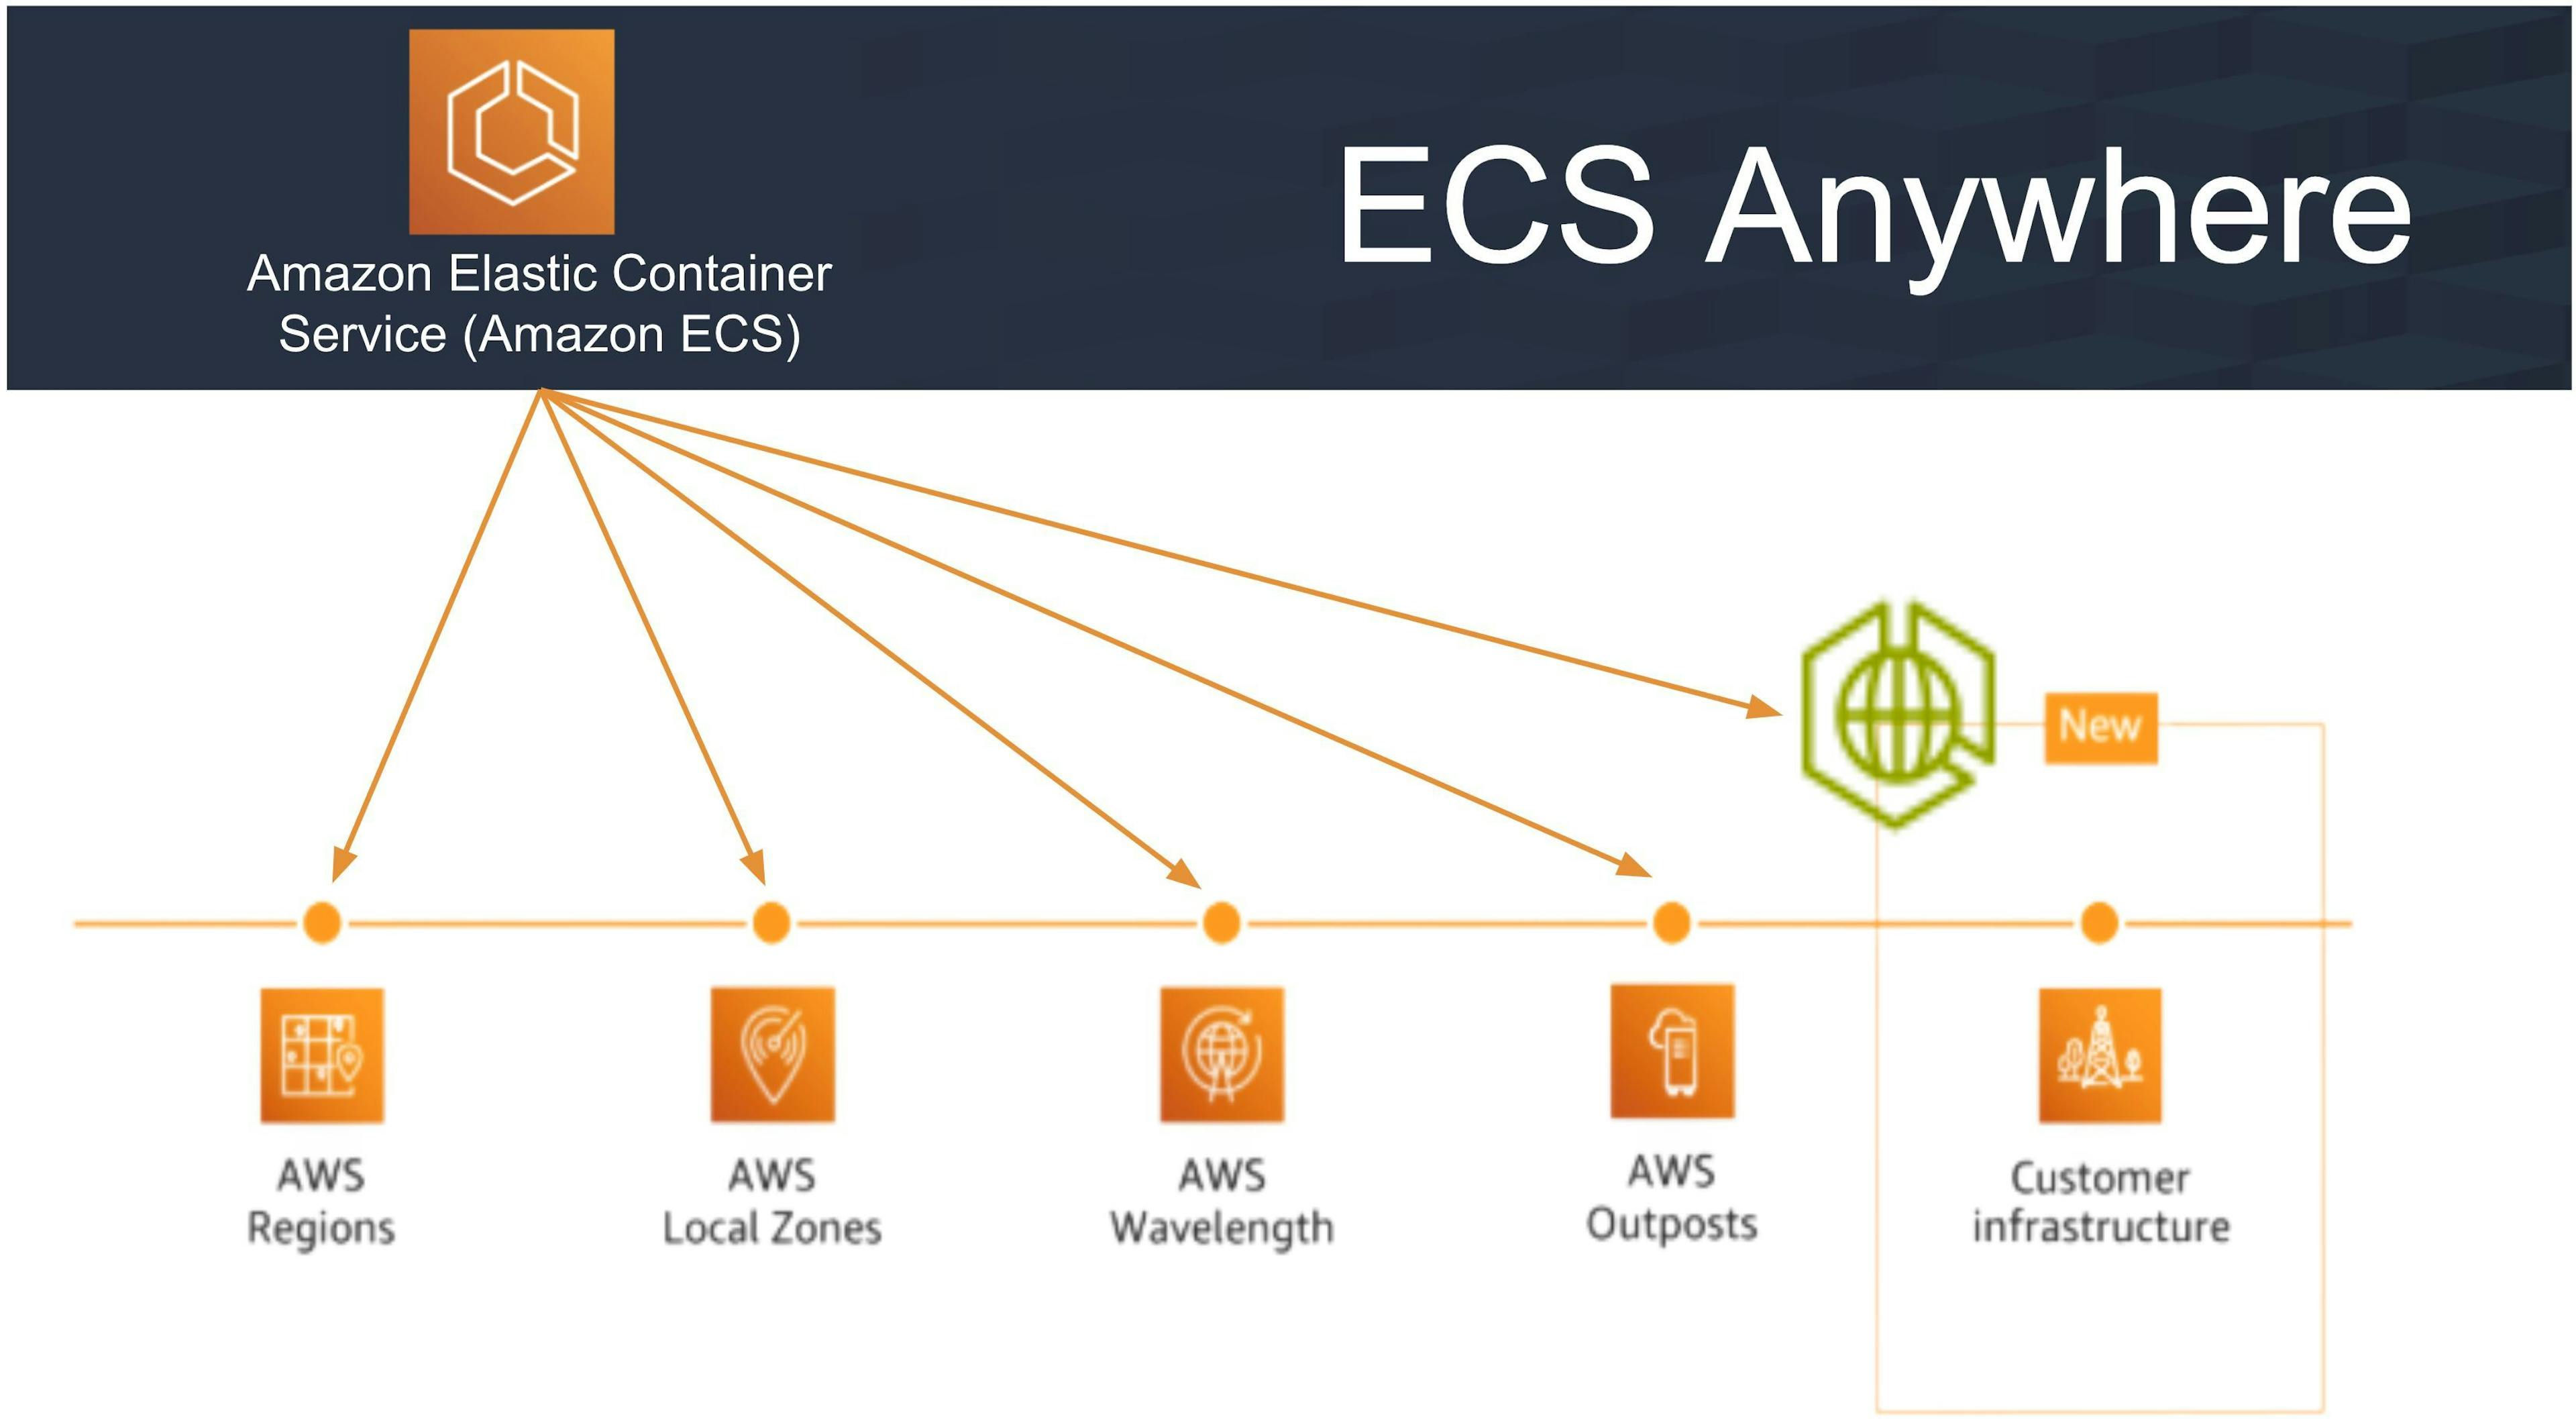 featured image - Amazon Elastic Container Service (ECS) Anywhere: A New ECS Function